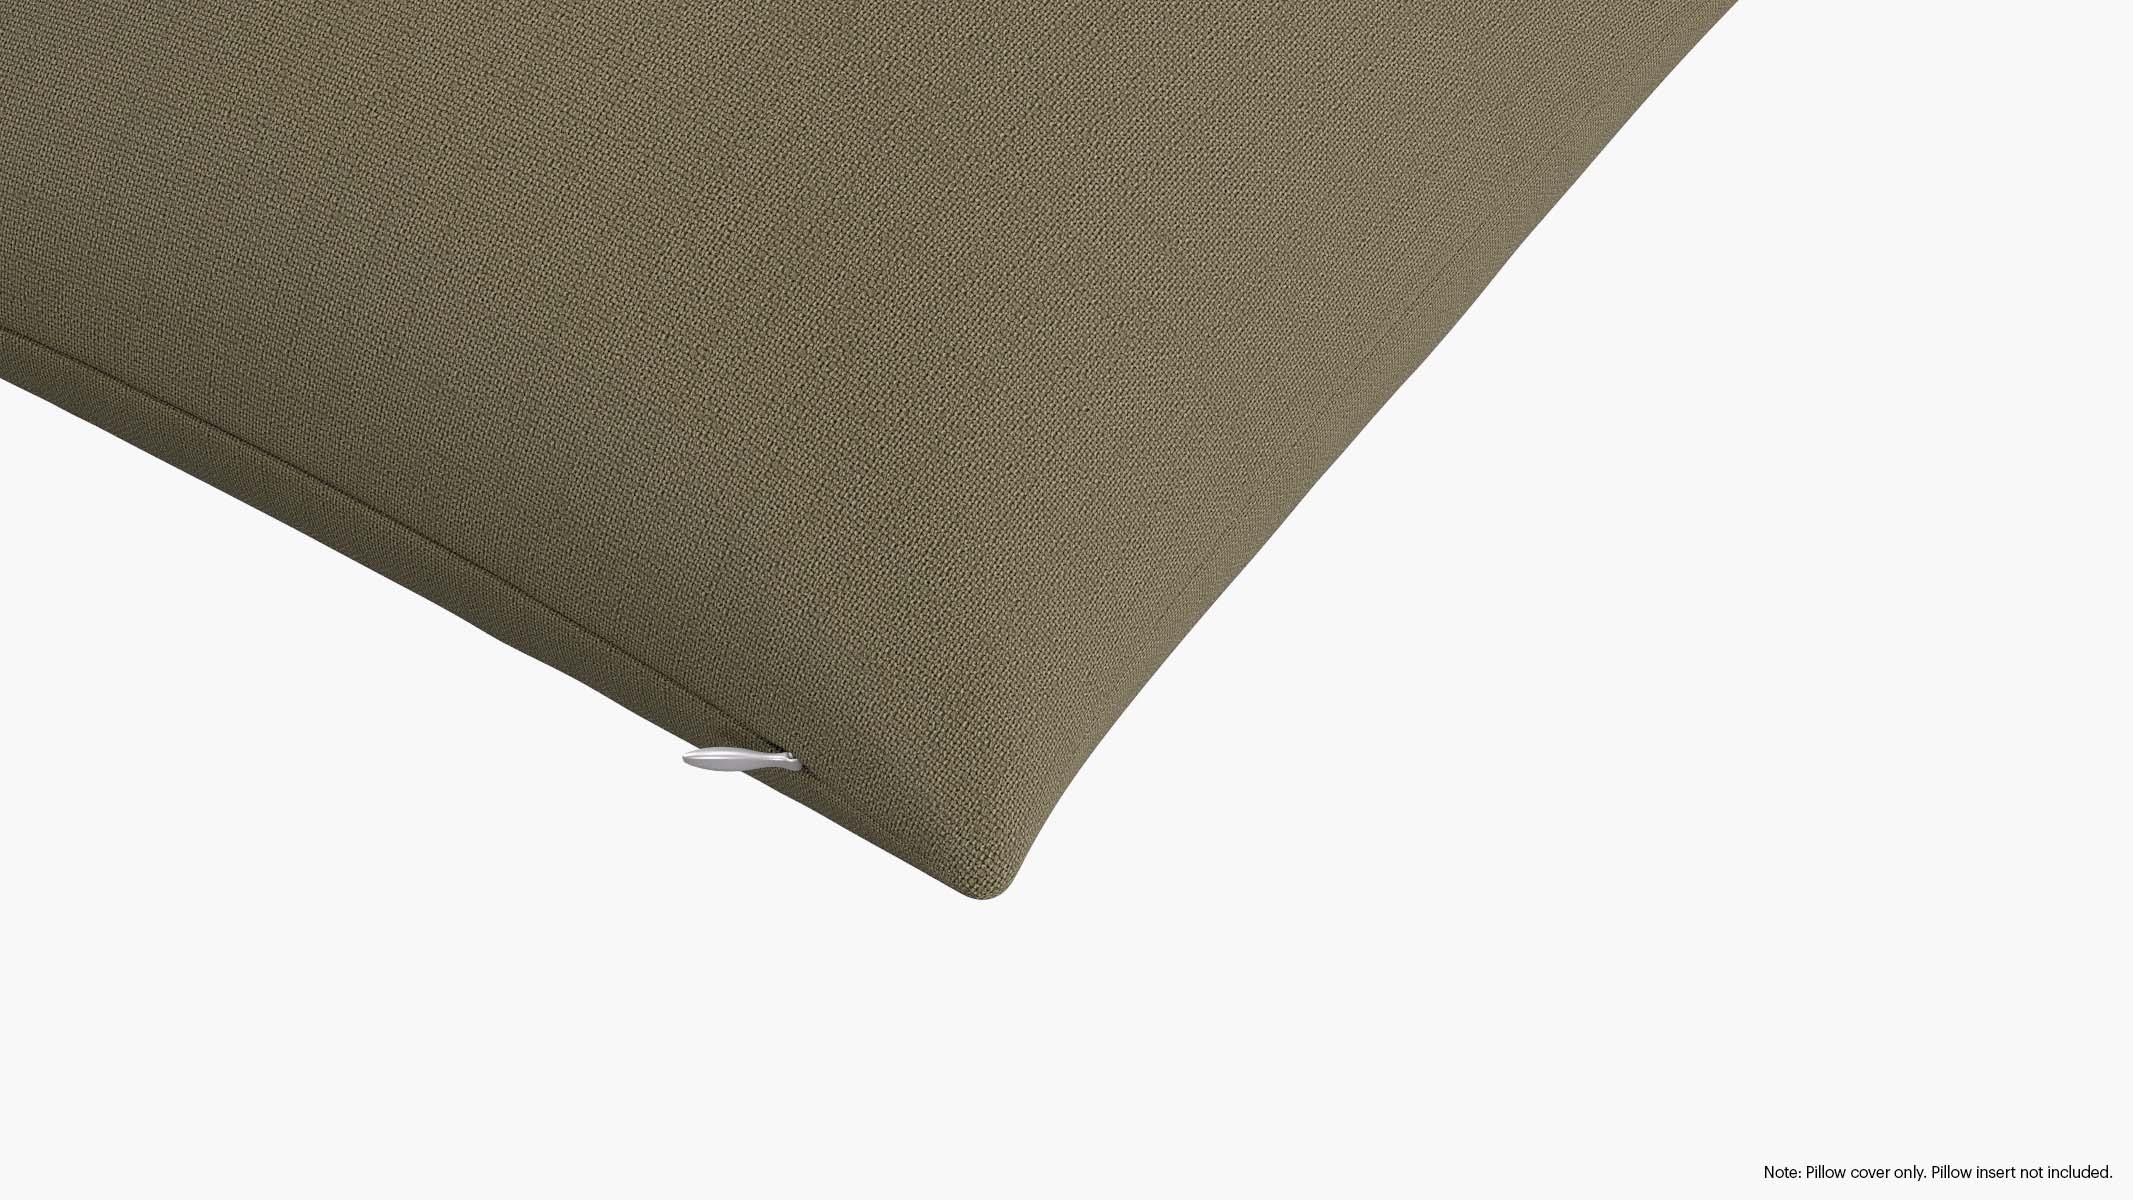 Throw Pillow Cover 18", Olive Everyday Linen, 18" x 18" - Image 1